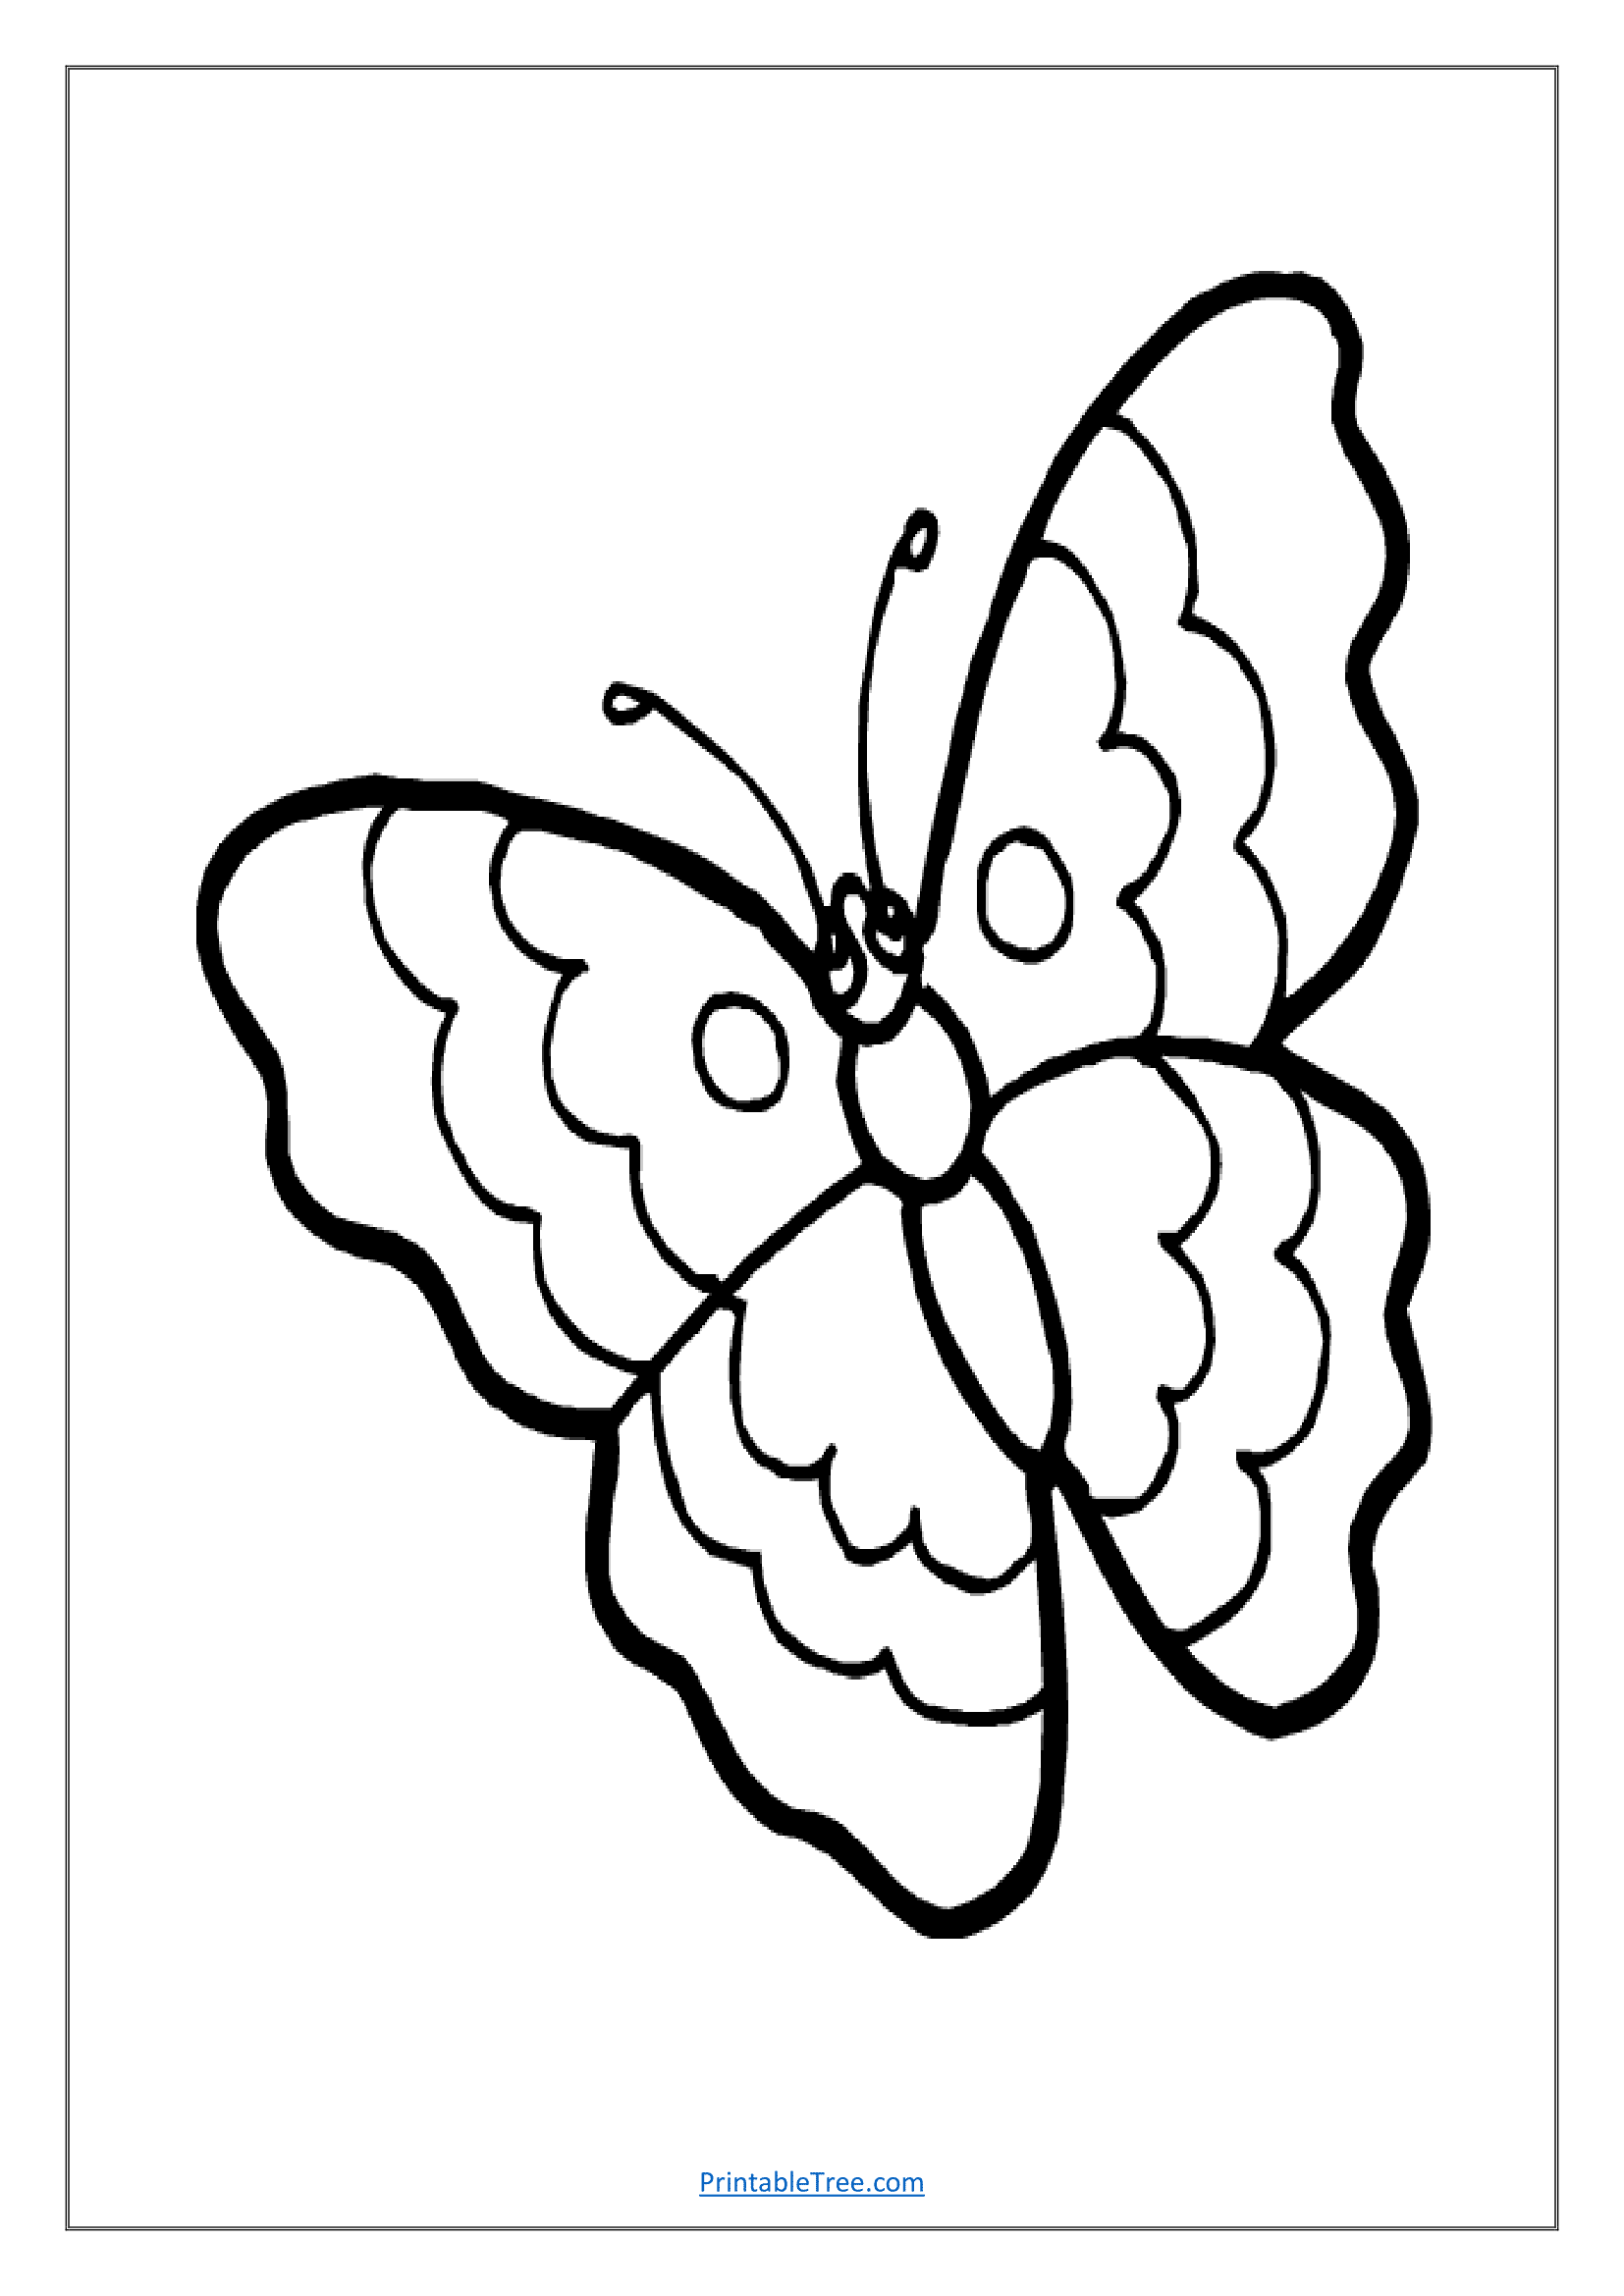 Free printable butterfly coloring pdf pages for kids and adults